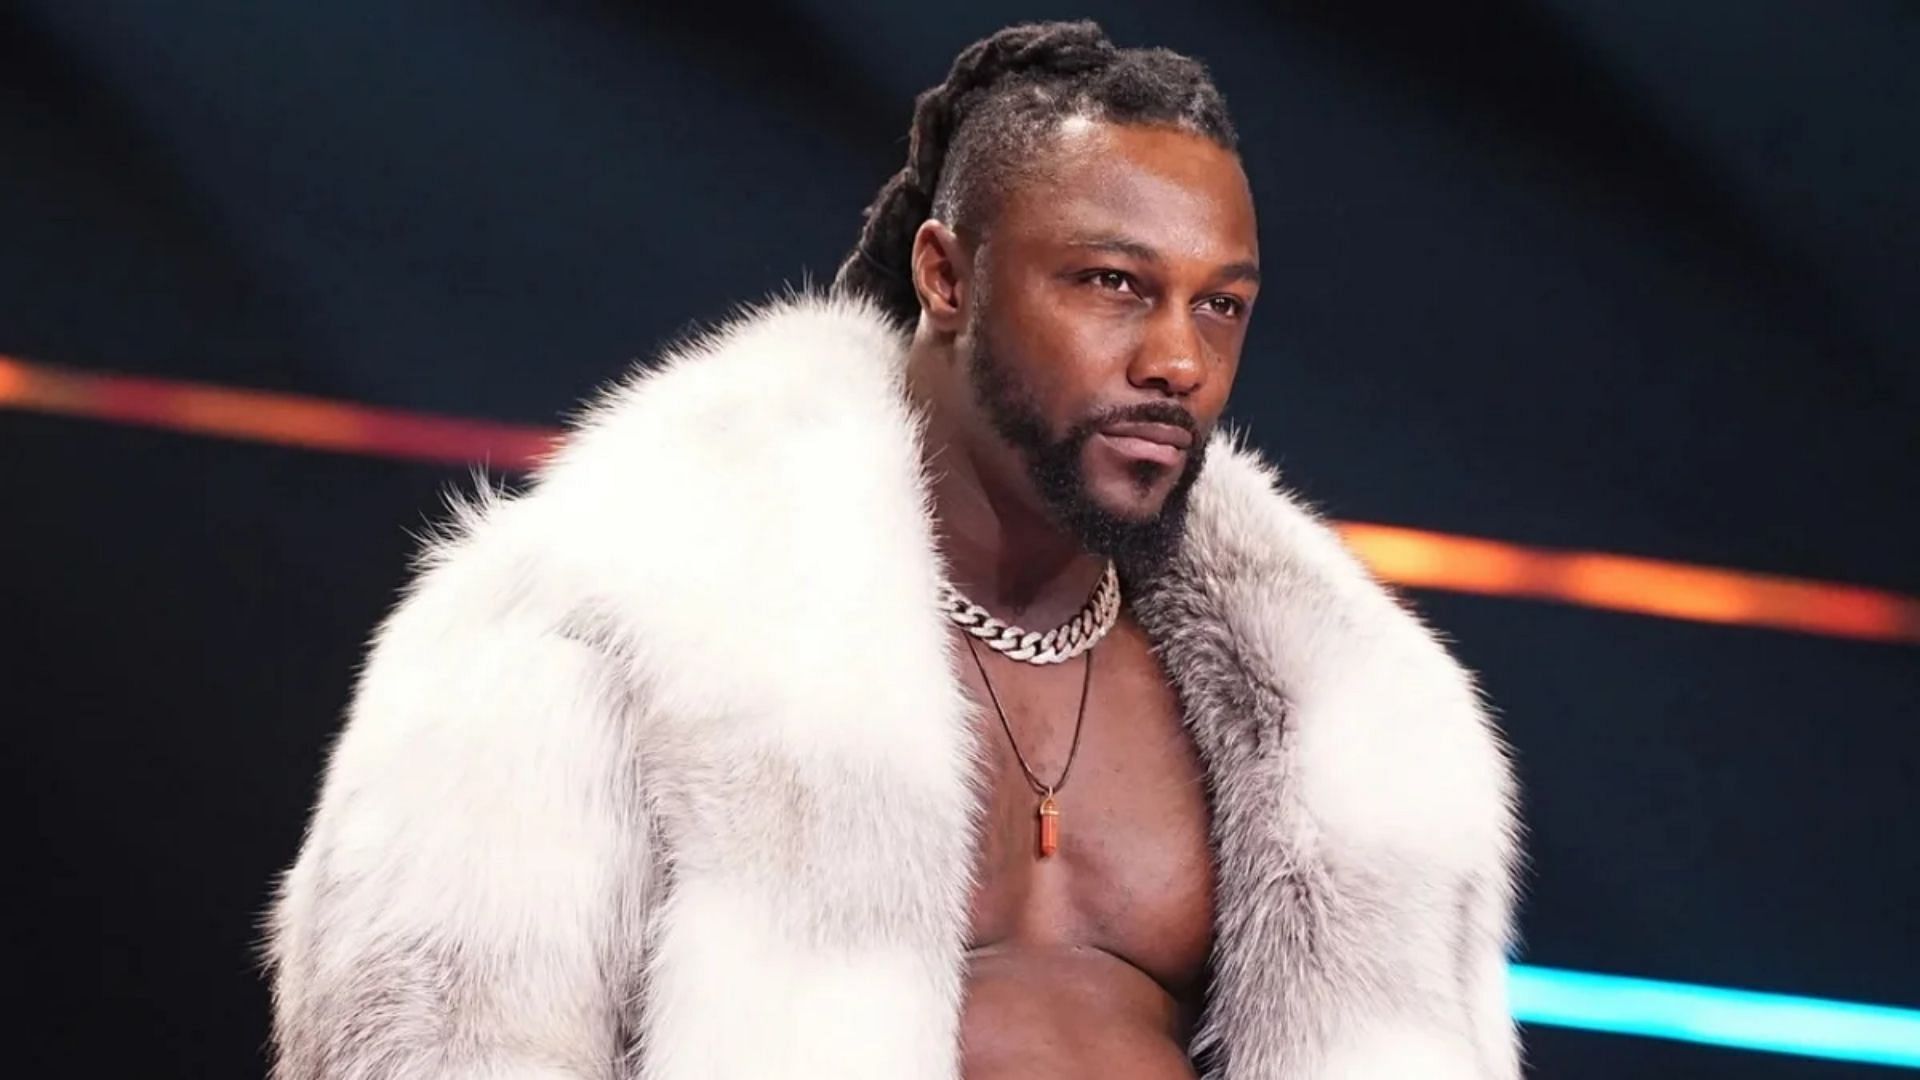 AEW star Swerve Strickland claims he was 